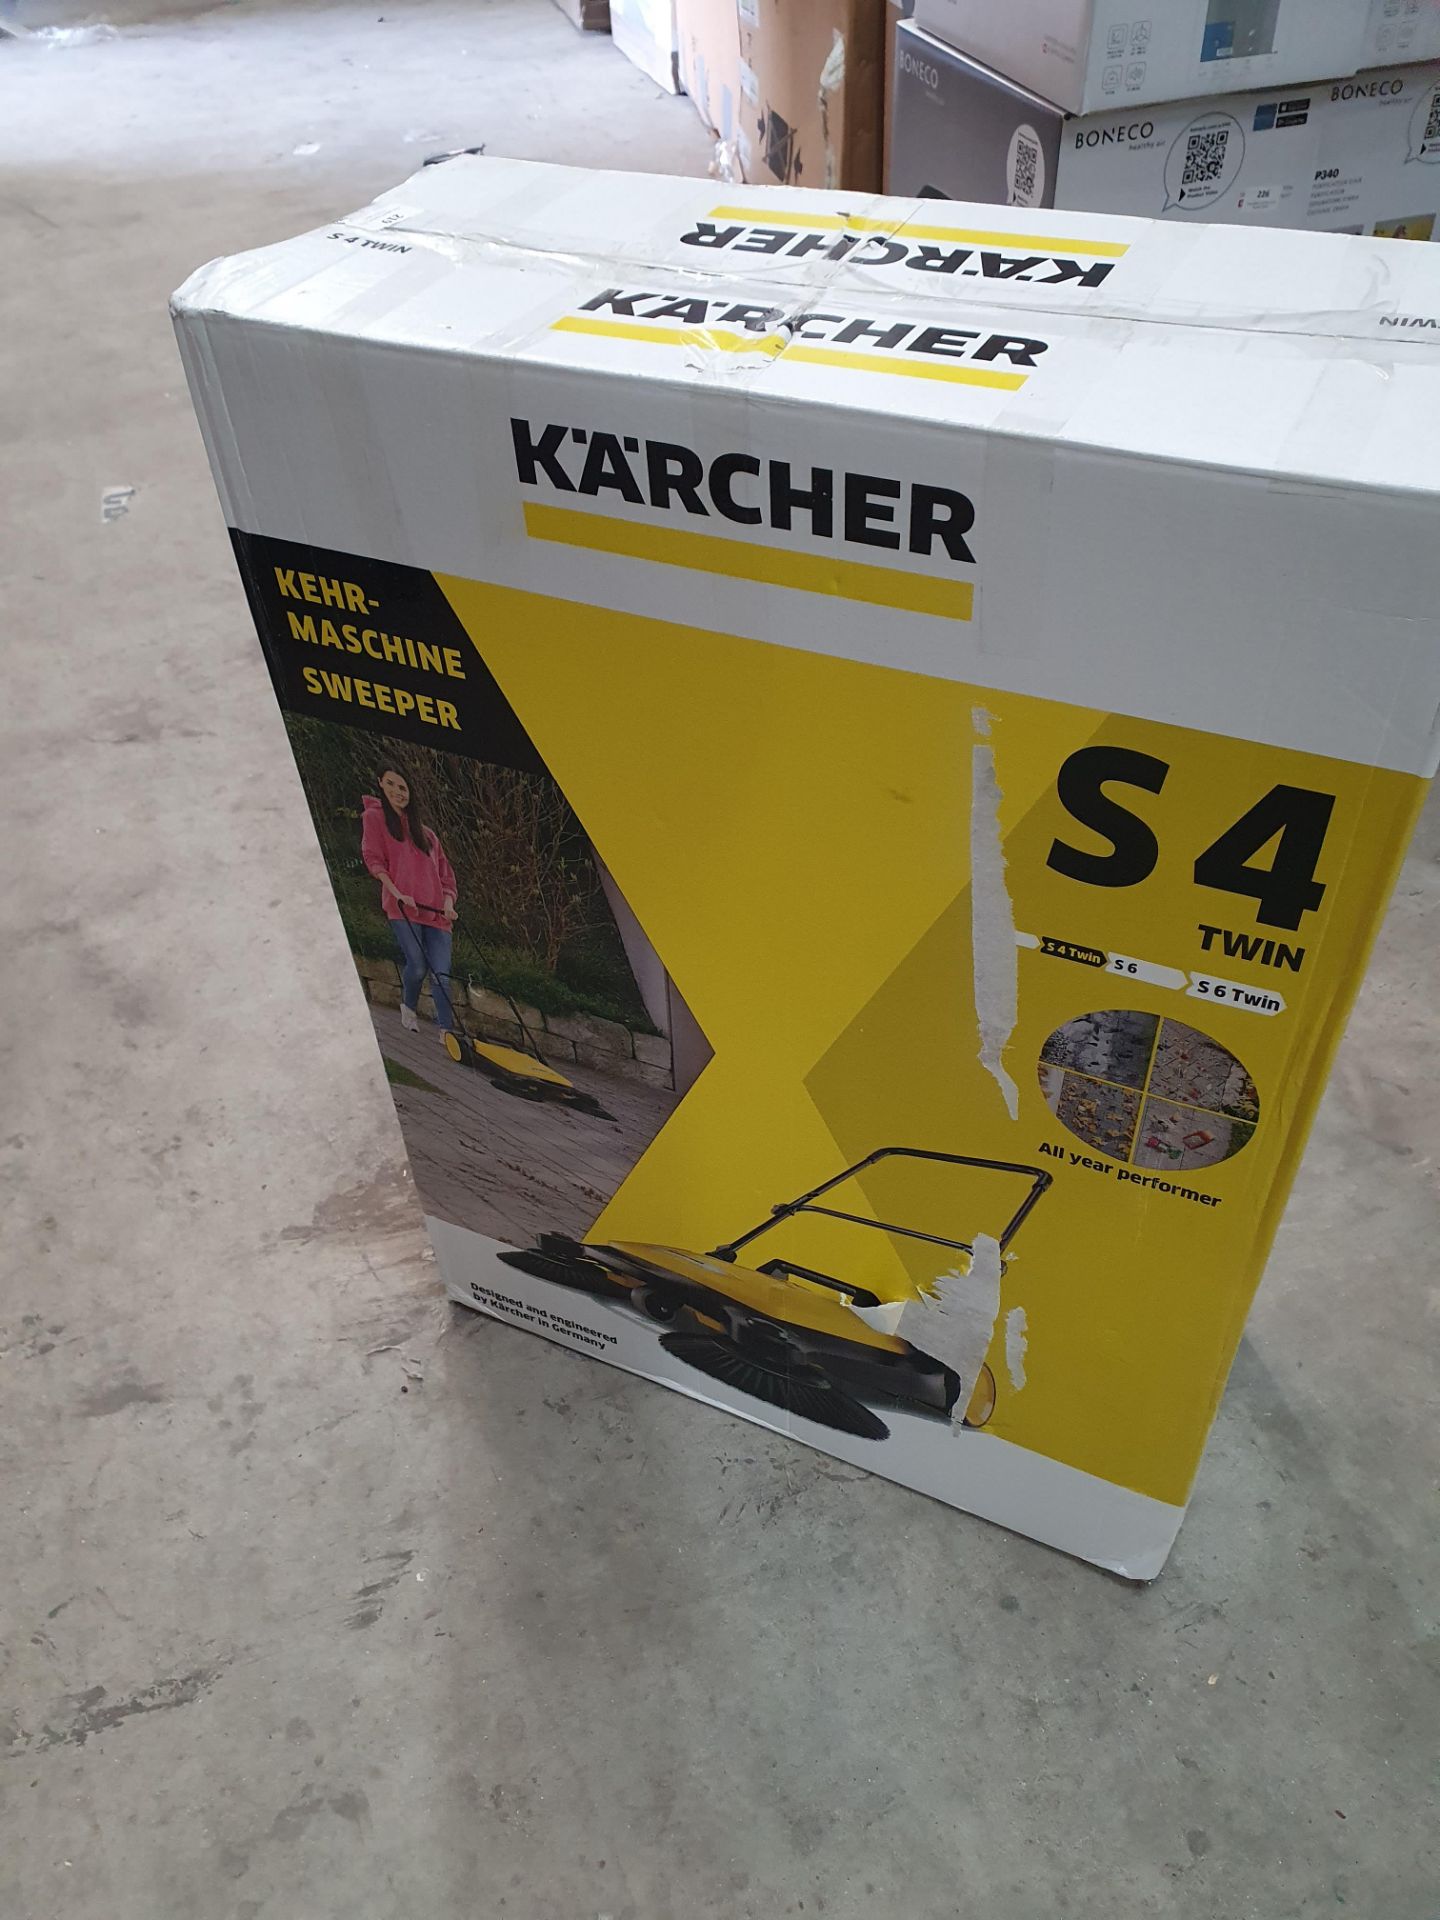 * Karcher S4 twin push sweeper RRP £150